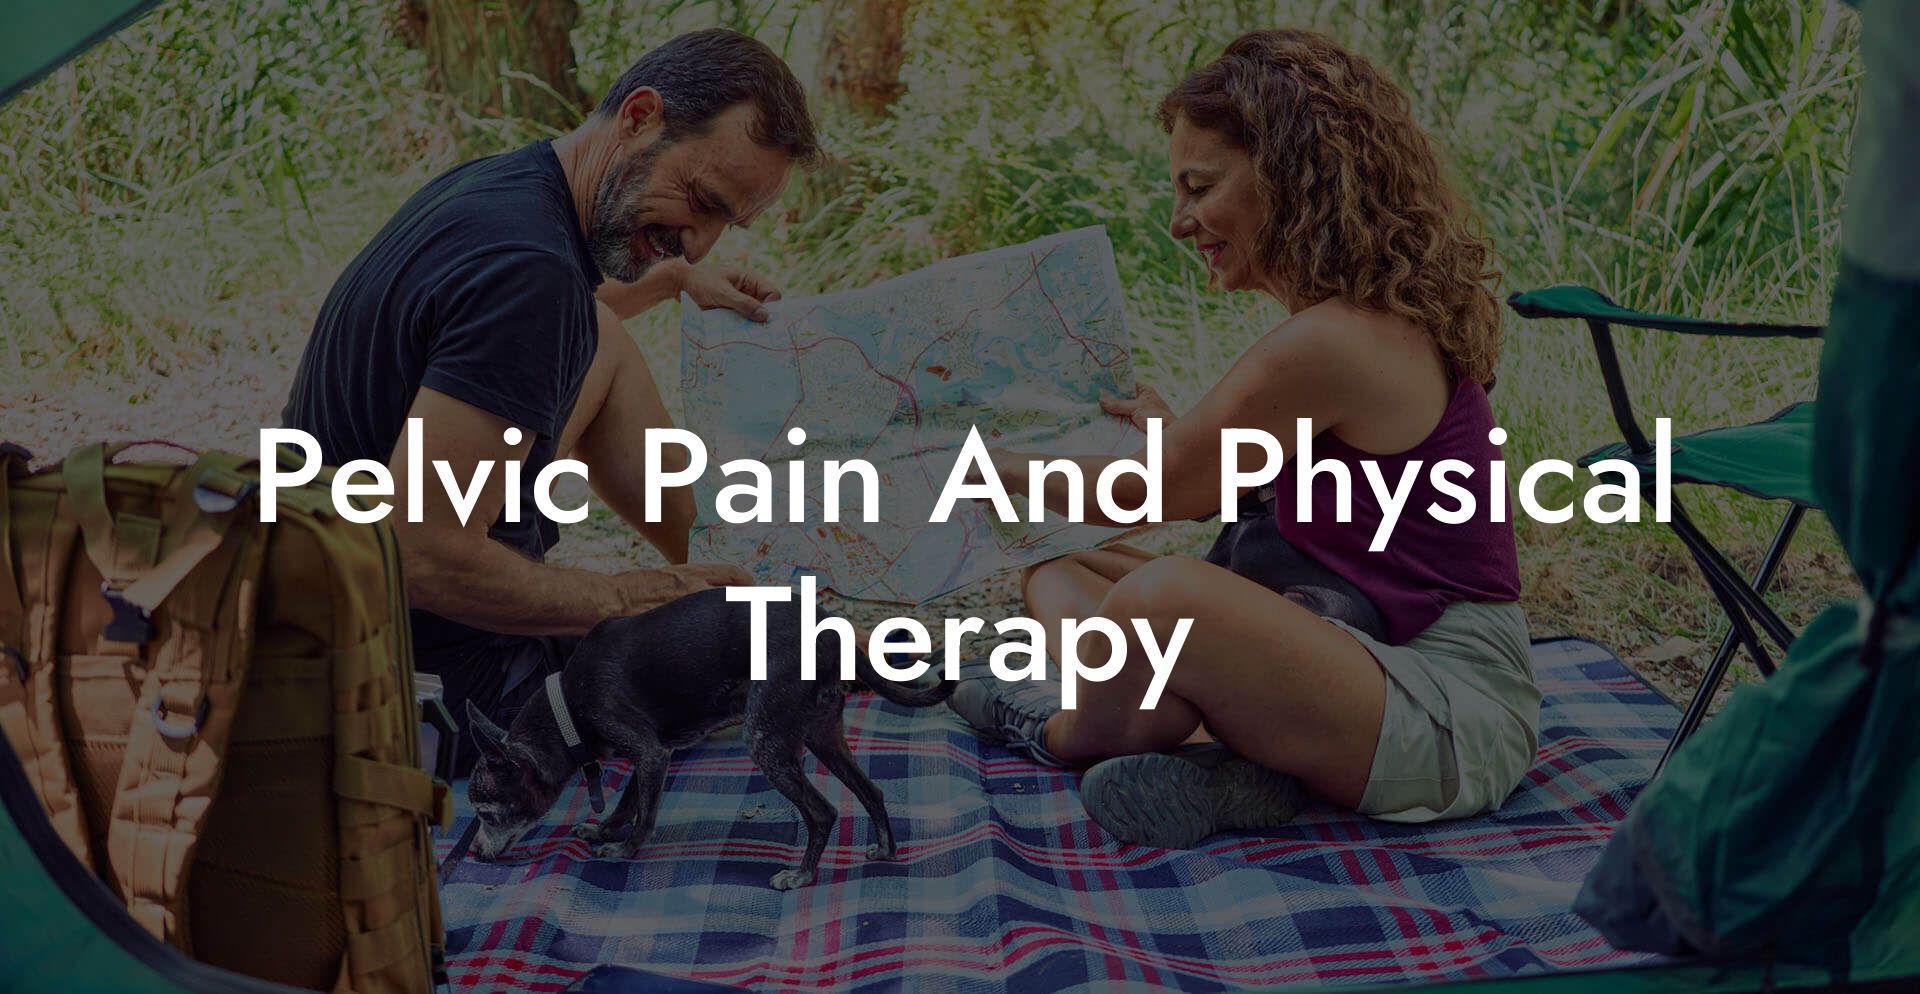 Pelvic Pain And Physical Therapy